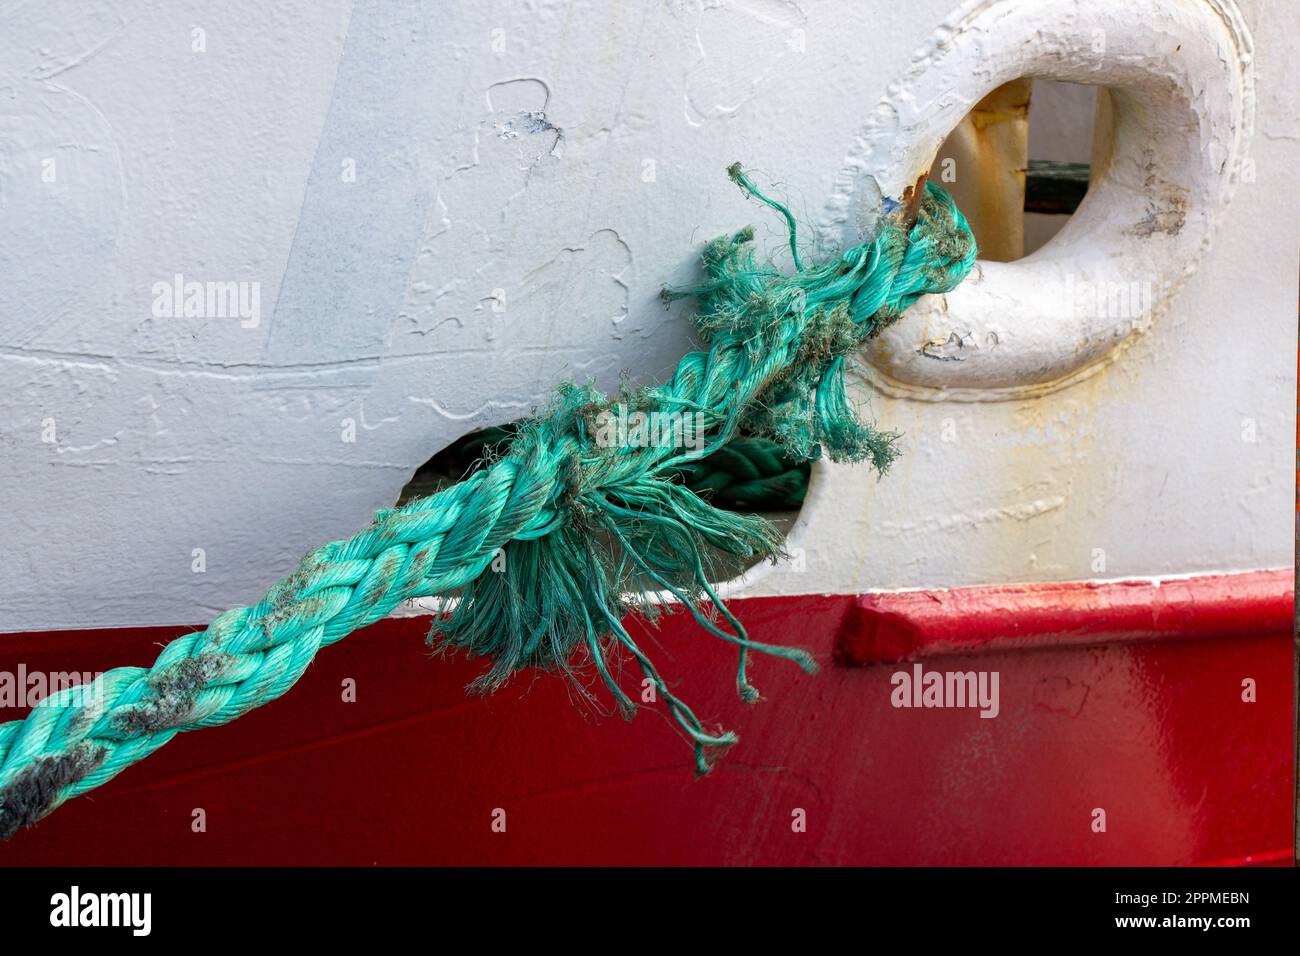 Badly frayed mooring line about to snap or part. Stock Photo